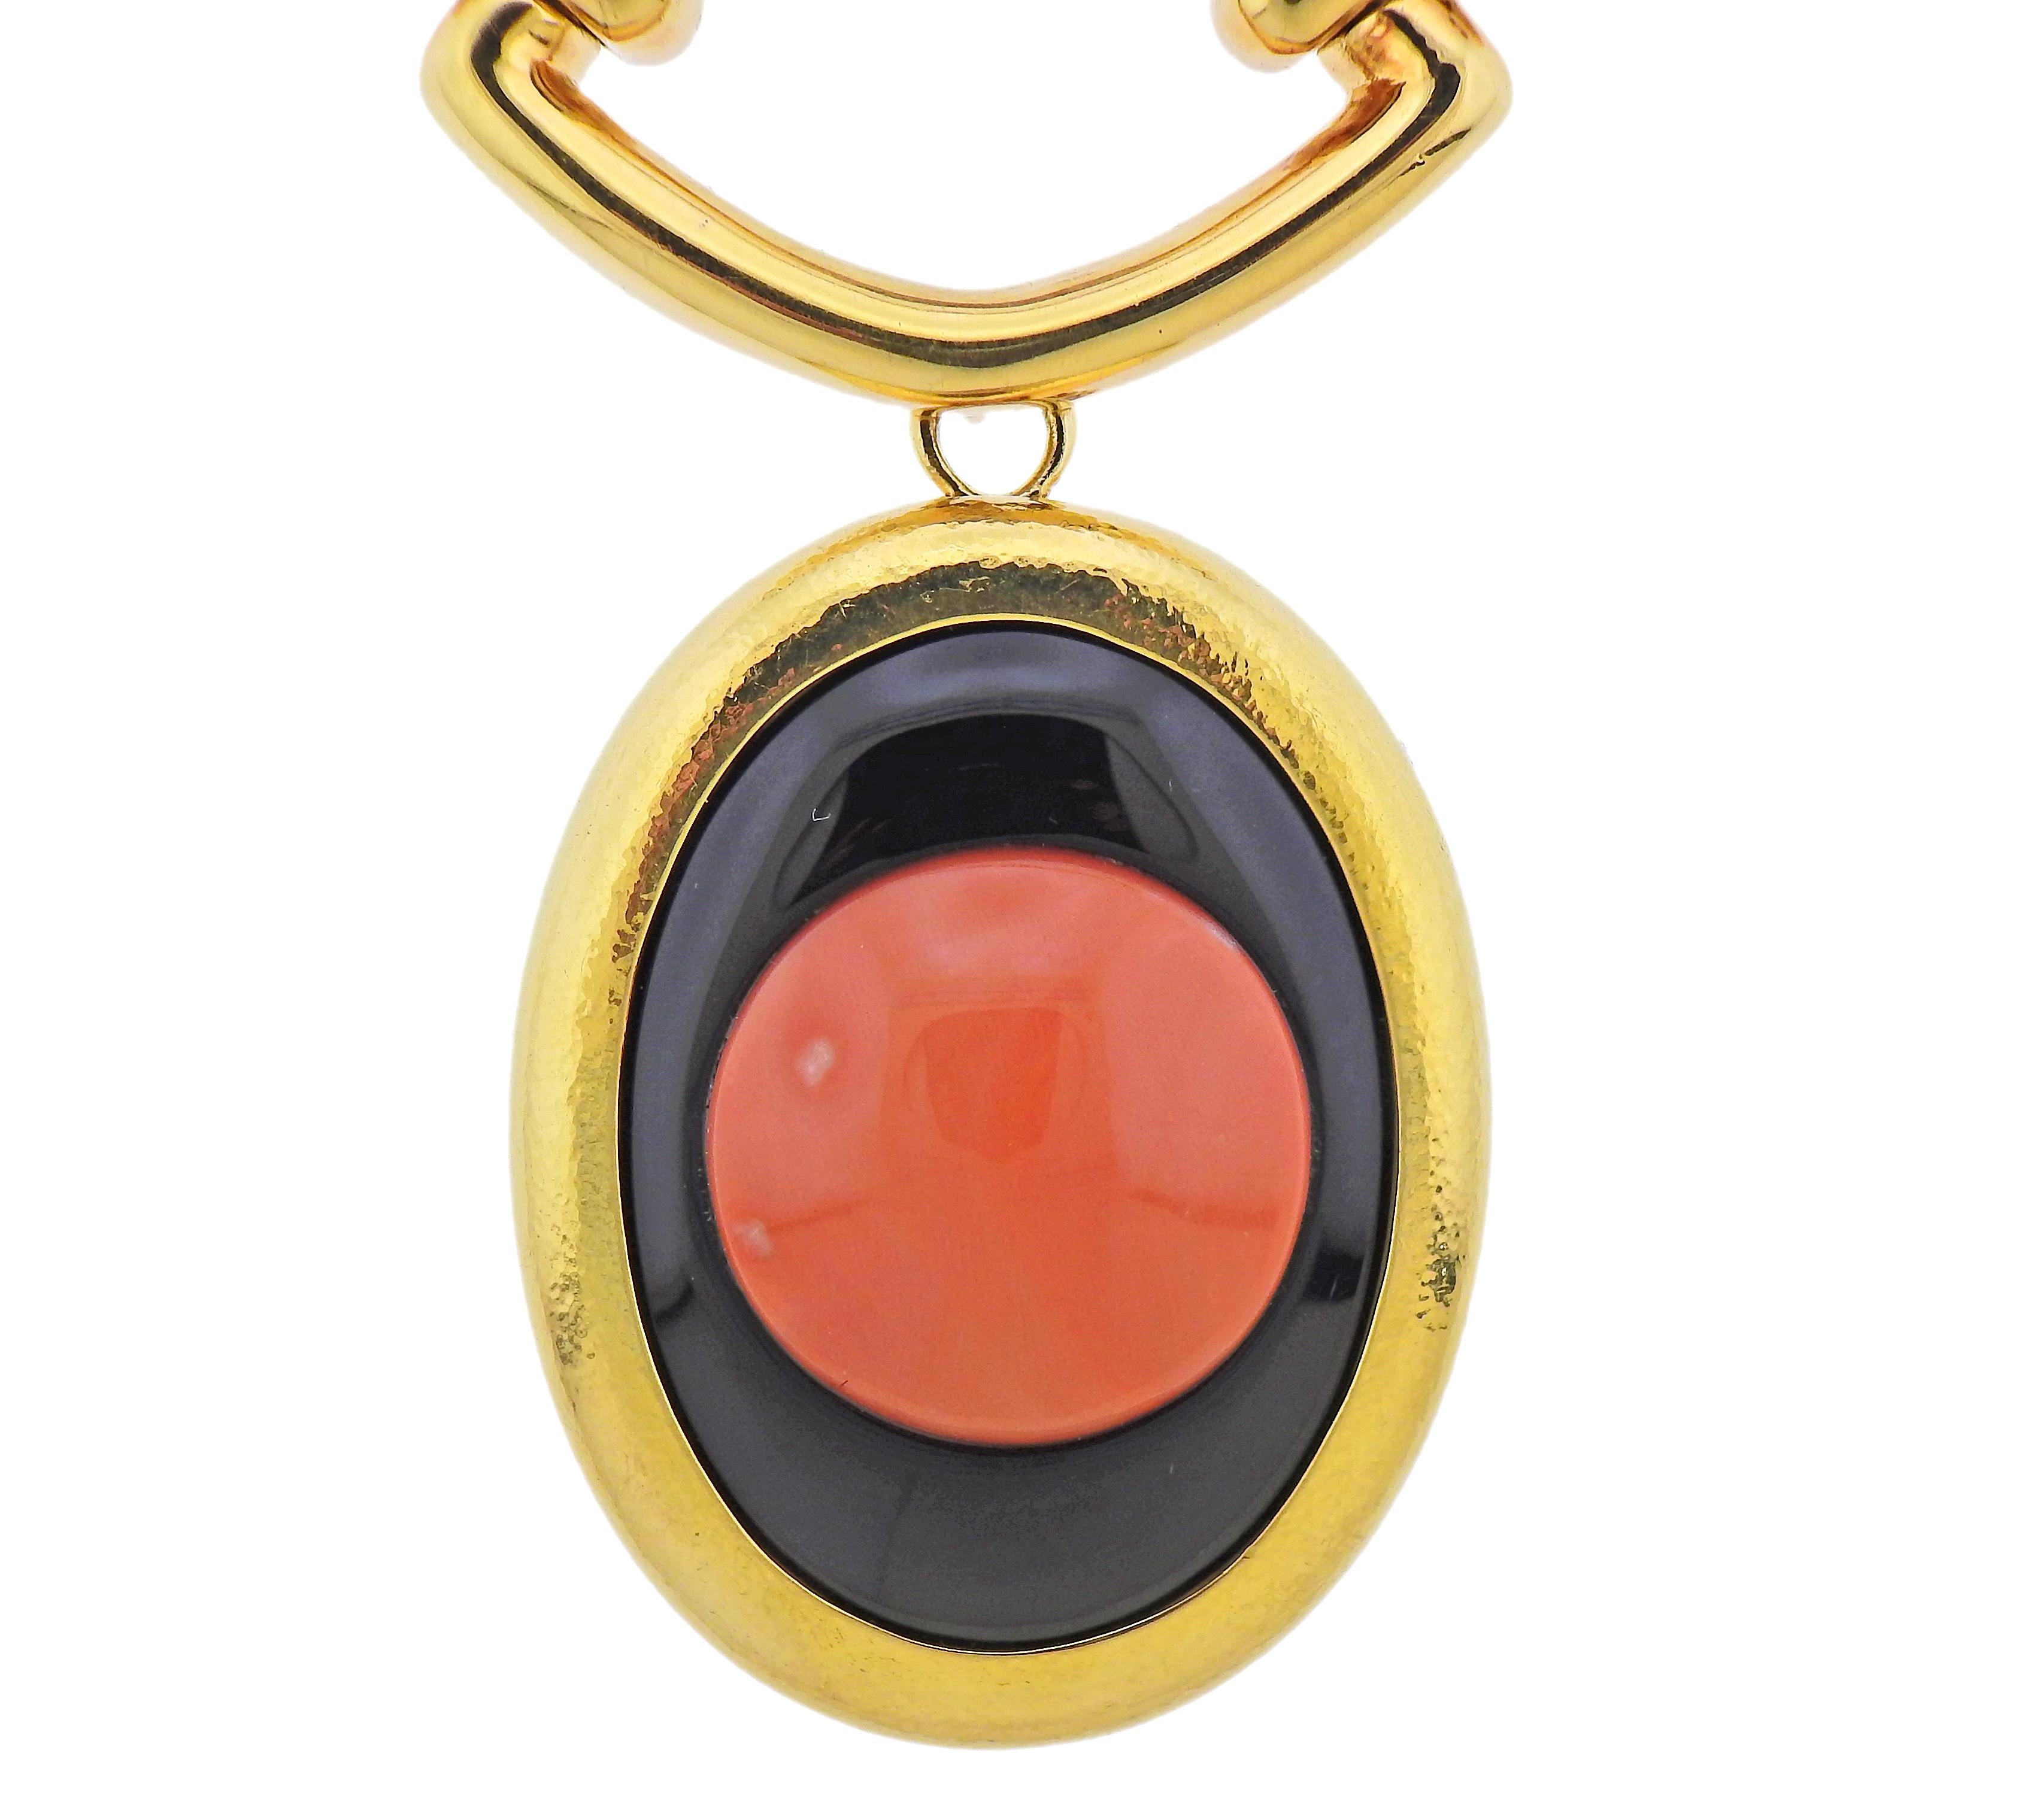 Chunly 18k gold link necklace with detachable oval pendant, convertible into a brooch. Both designed by David Webb, set with 22mm coral and onyx. Pendant marked: Webb, 185, JP55. Necklace: JP 55, 18k, Webb. Weight - 151 grams. 